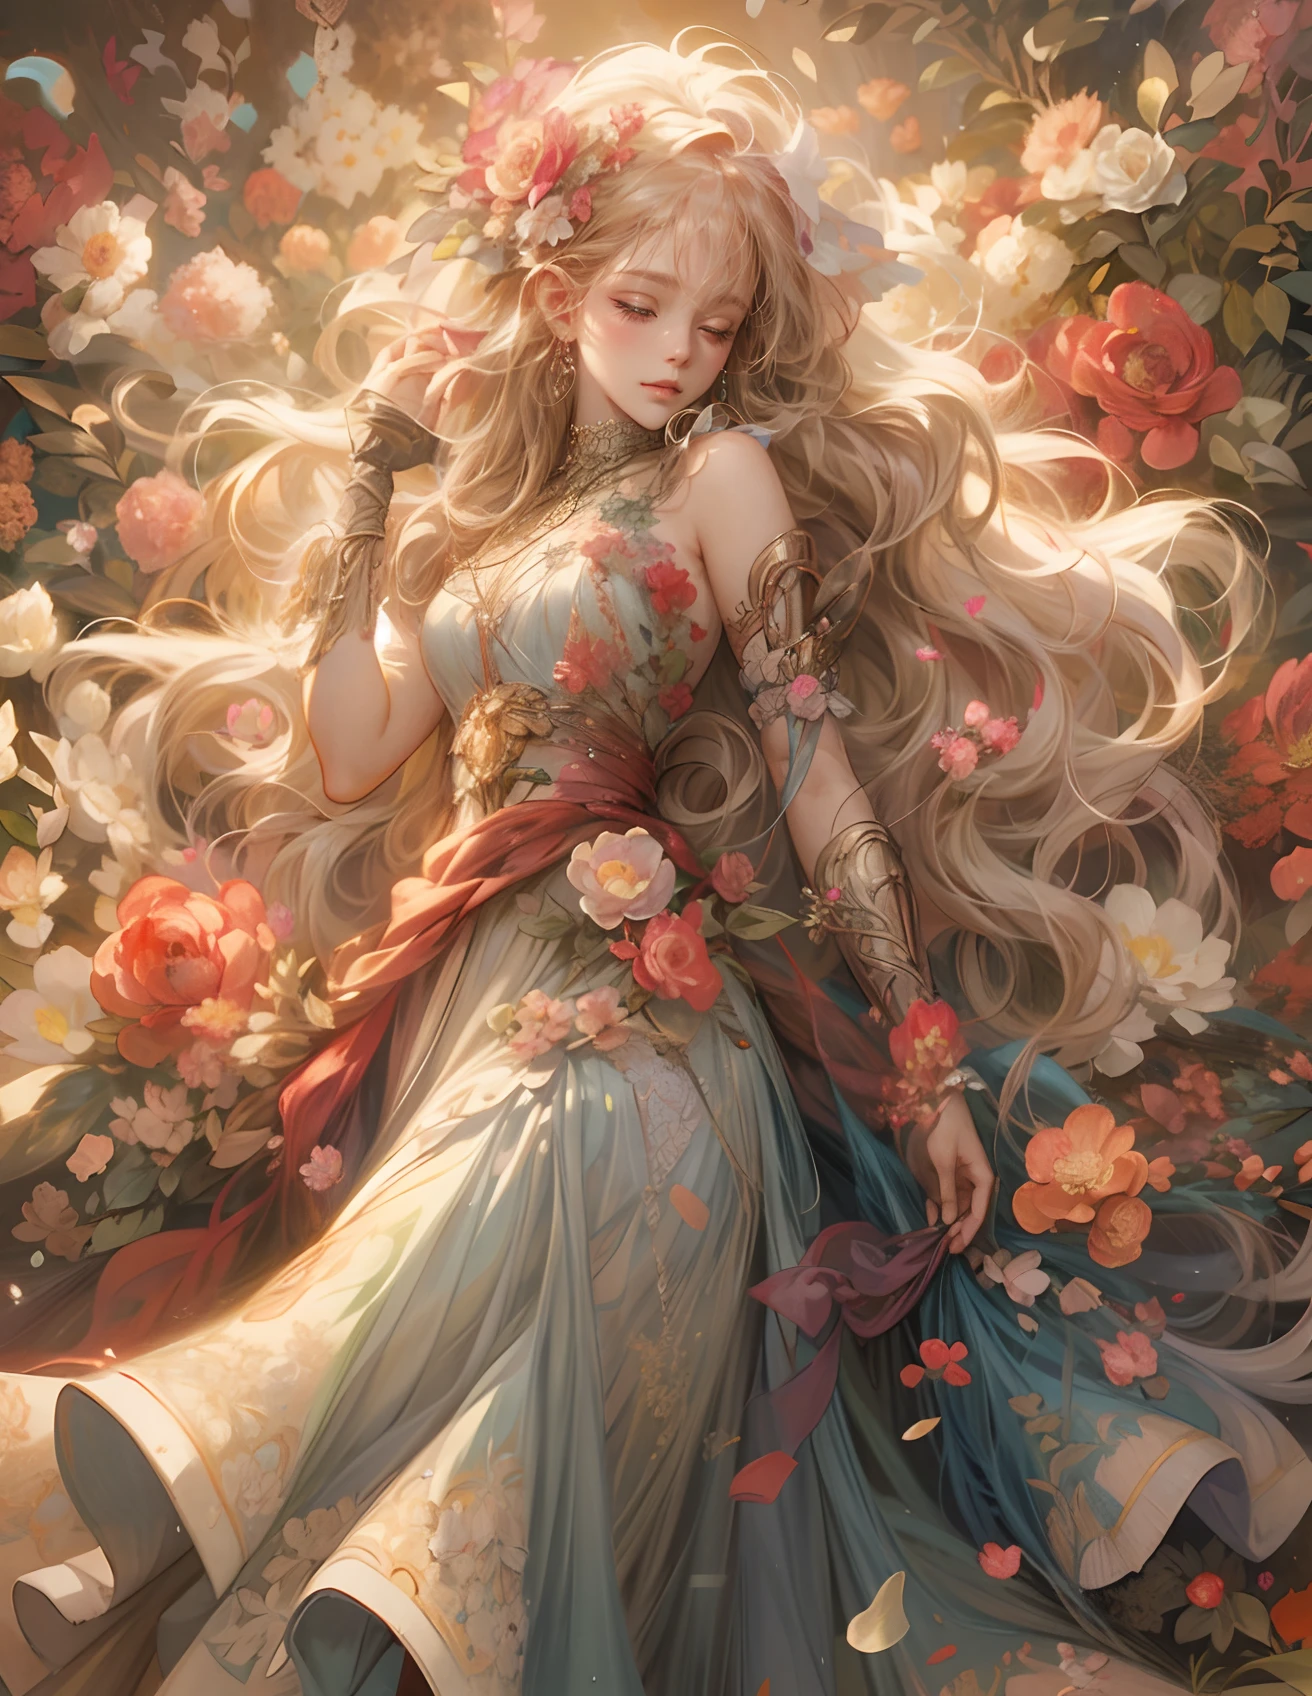 a woman with long hair and a dress is laying down in a garden, alphonse mucha and rossdraws, fantasy style art, anime fantasy illustration, beautiful anime art, flower goddess, beautiful anime artwork, fantasy art style, beautiful fantasy art, anime fantasy artwork, beautiful digital artwork, detailed digital anime art, beautiful character painting, beautiful fantasy maiden, a beautiful artwork illustration